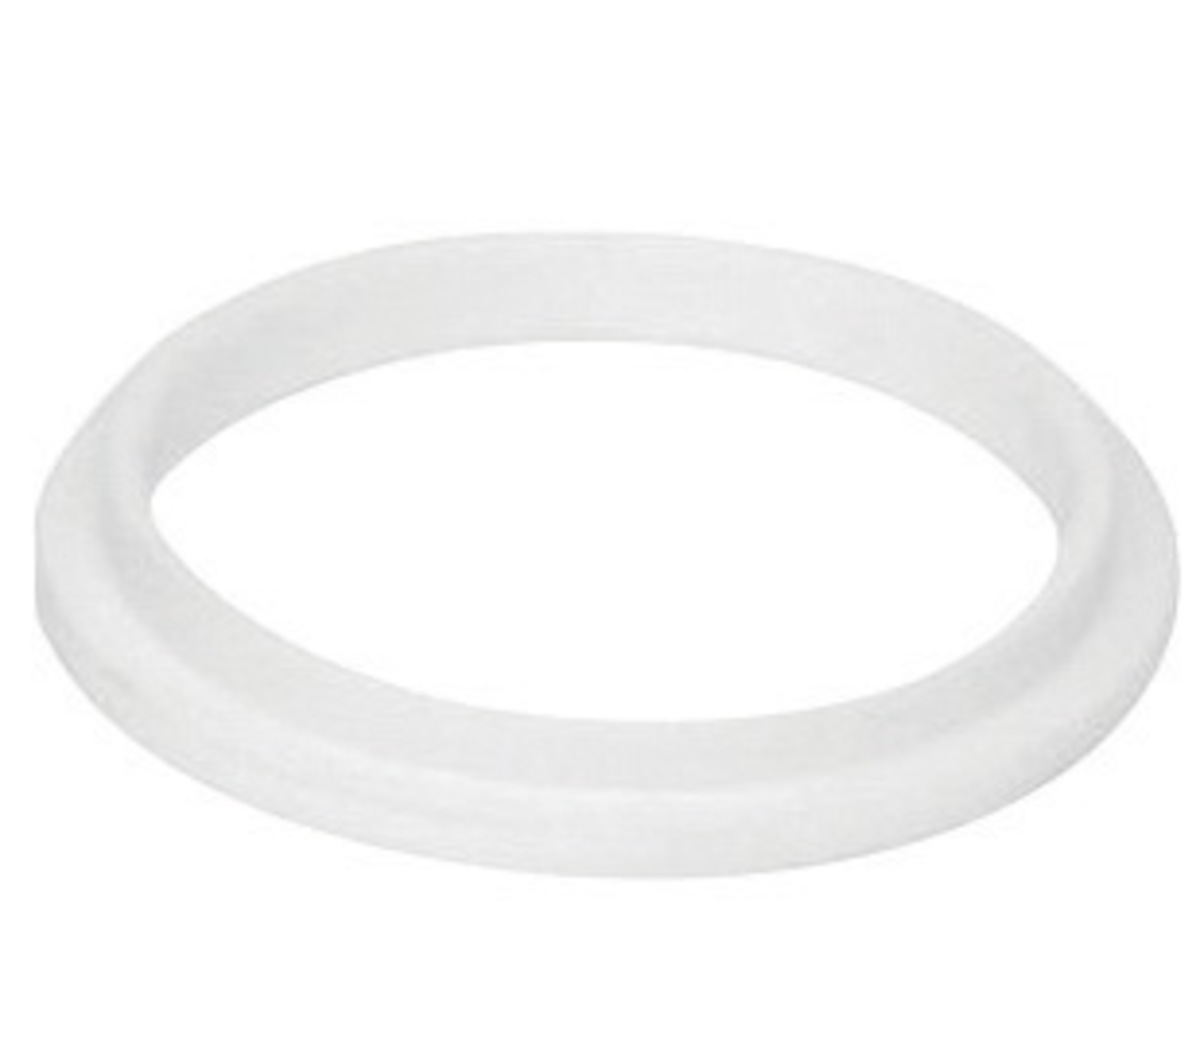 Centricut® 40 mm X 5 mm Ceramic Insulator Ring For Ma CECMZ408-0240 for sale online at autumn supply